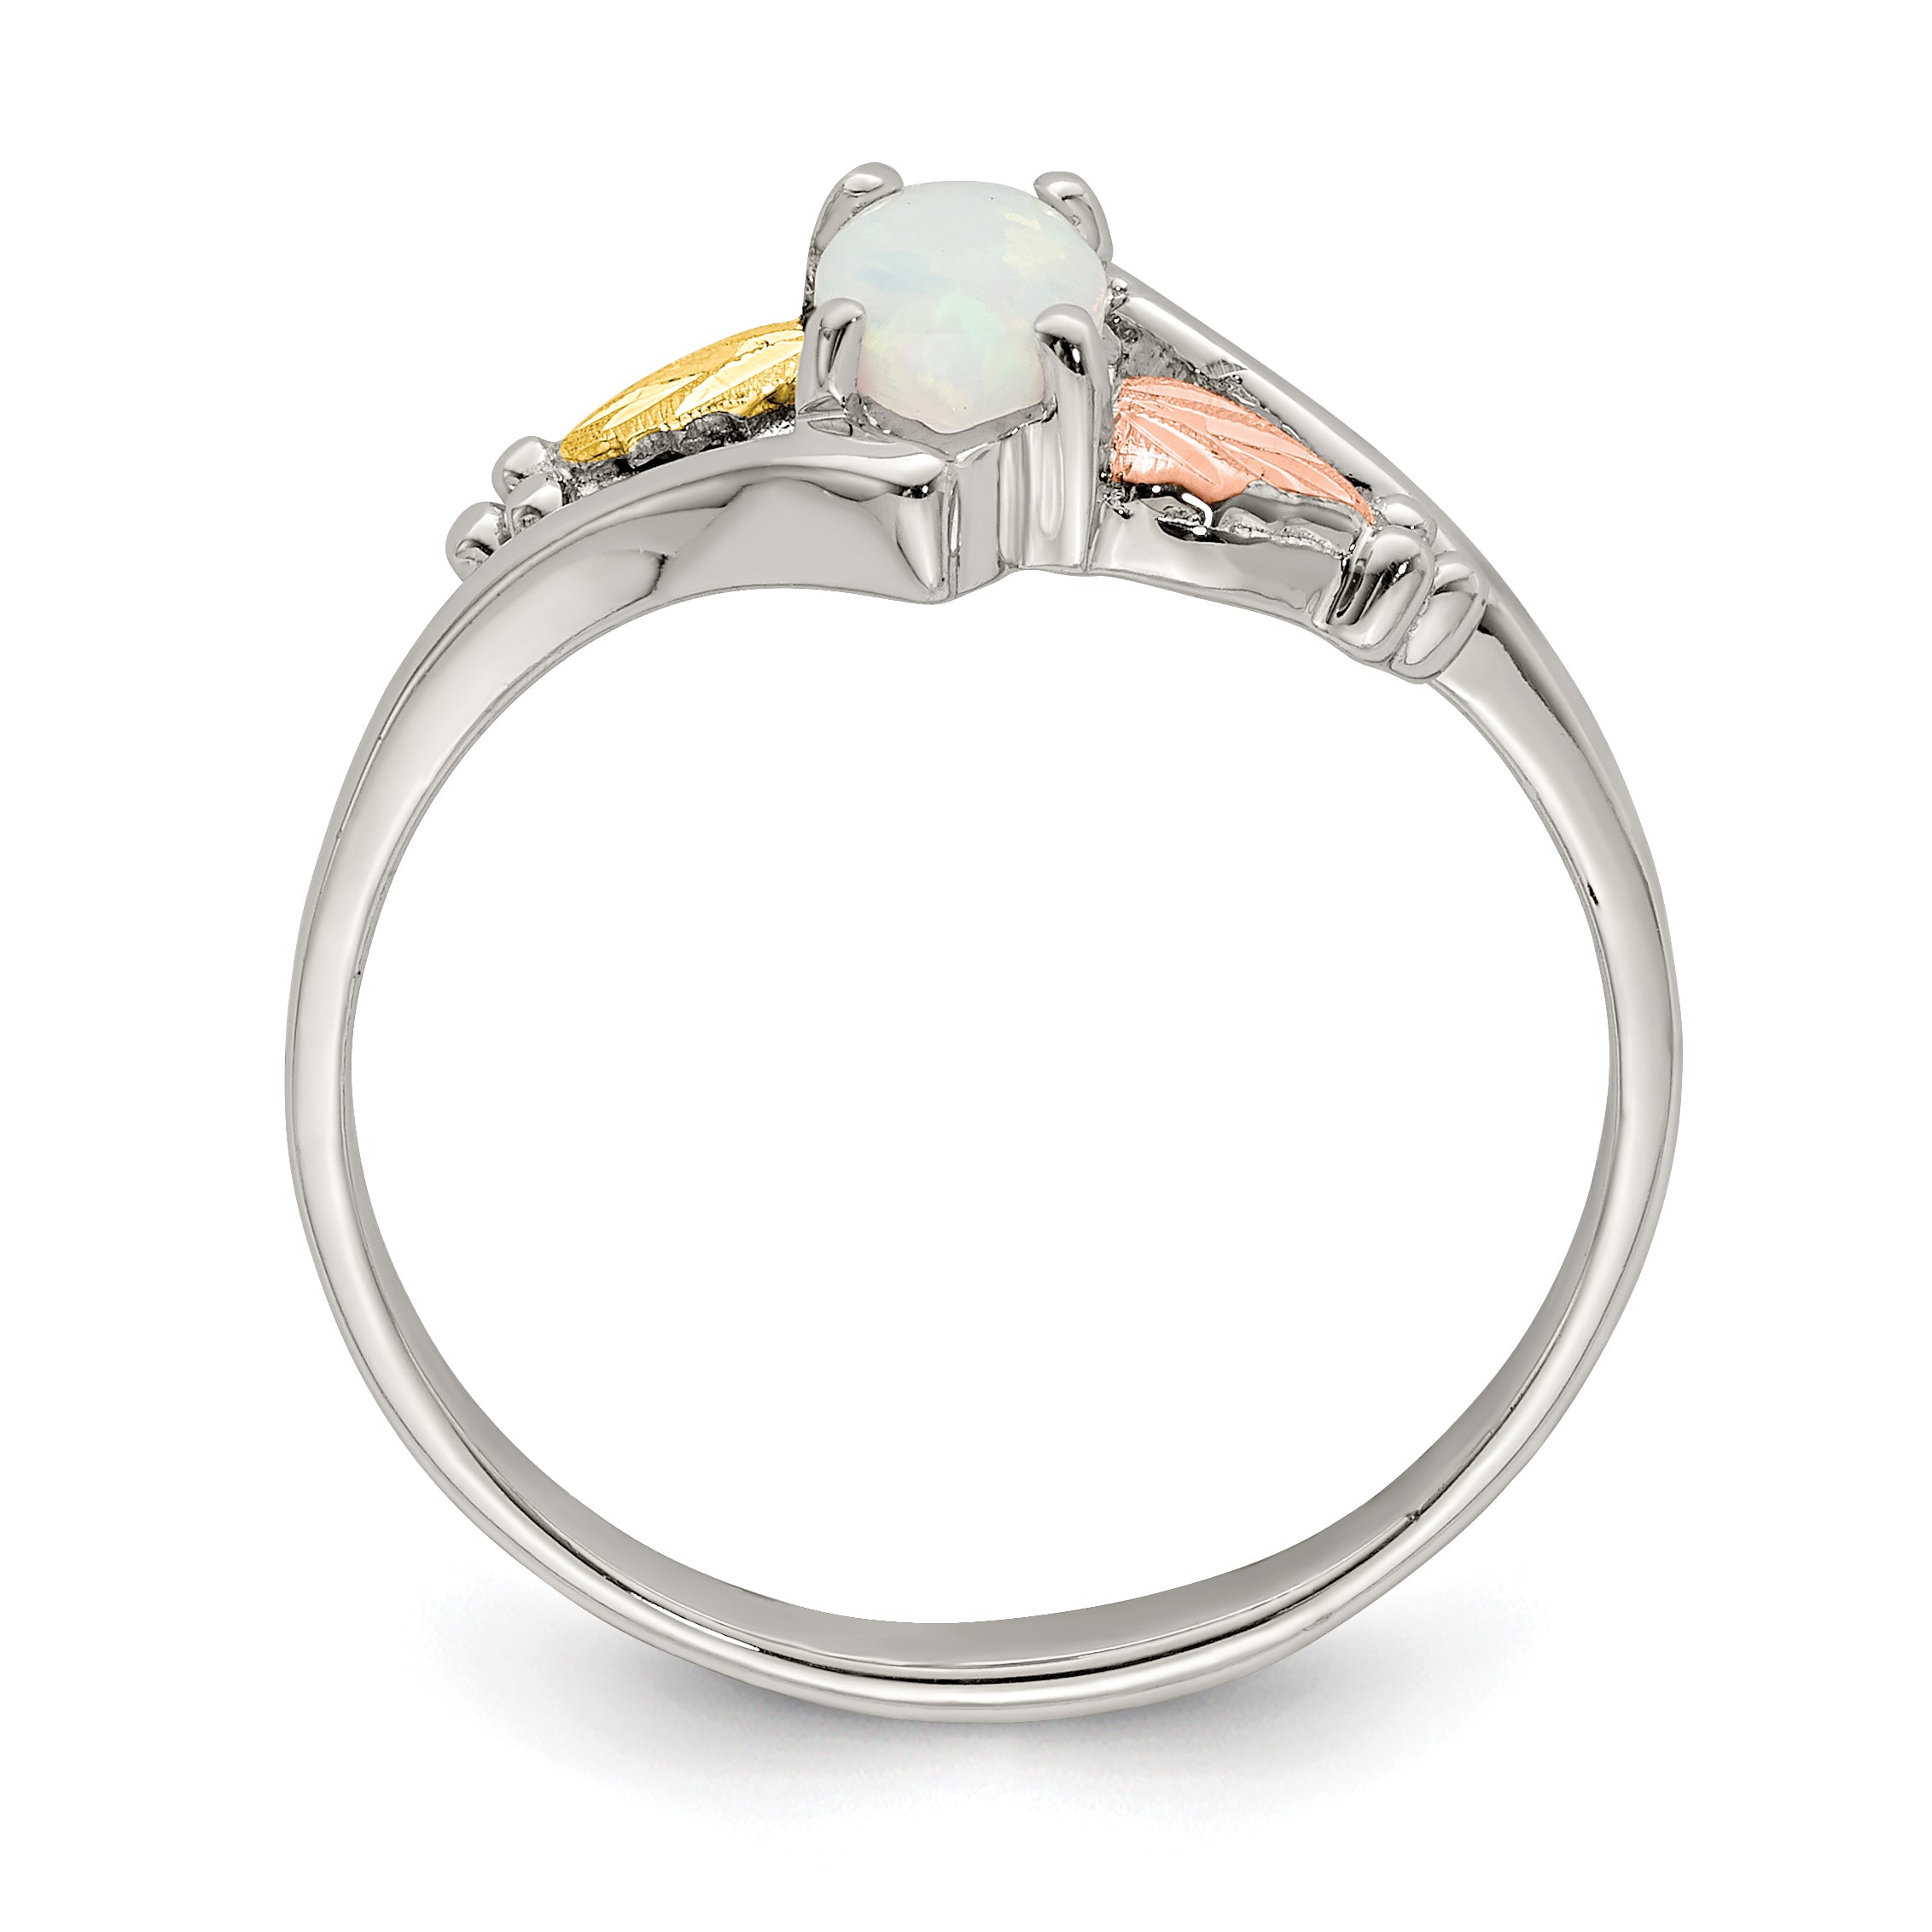 Landstrom's Mt. Rushmore Black Hills Sterling Silver 12K Gold Accents Lab Created Opal Ring